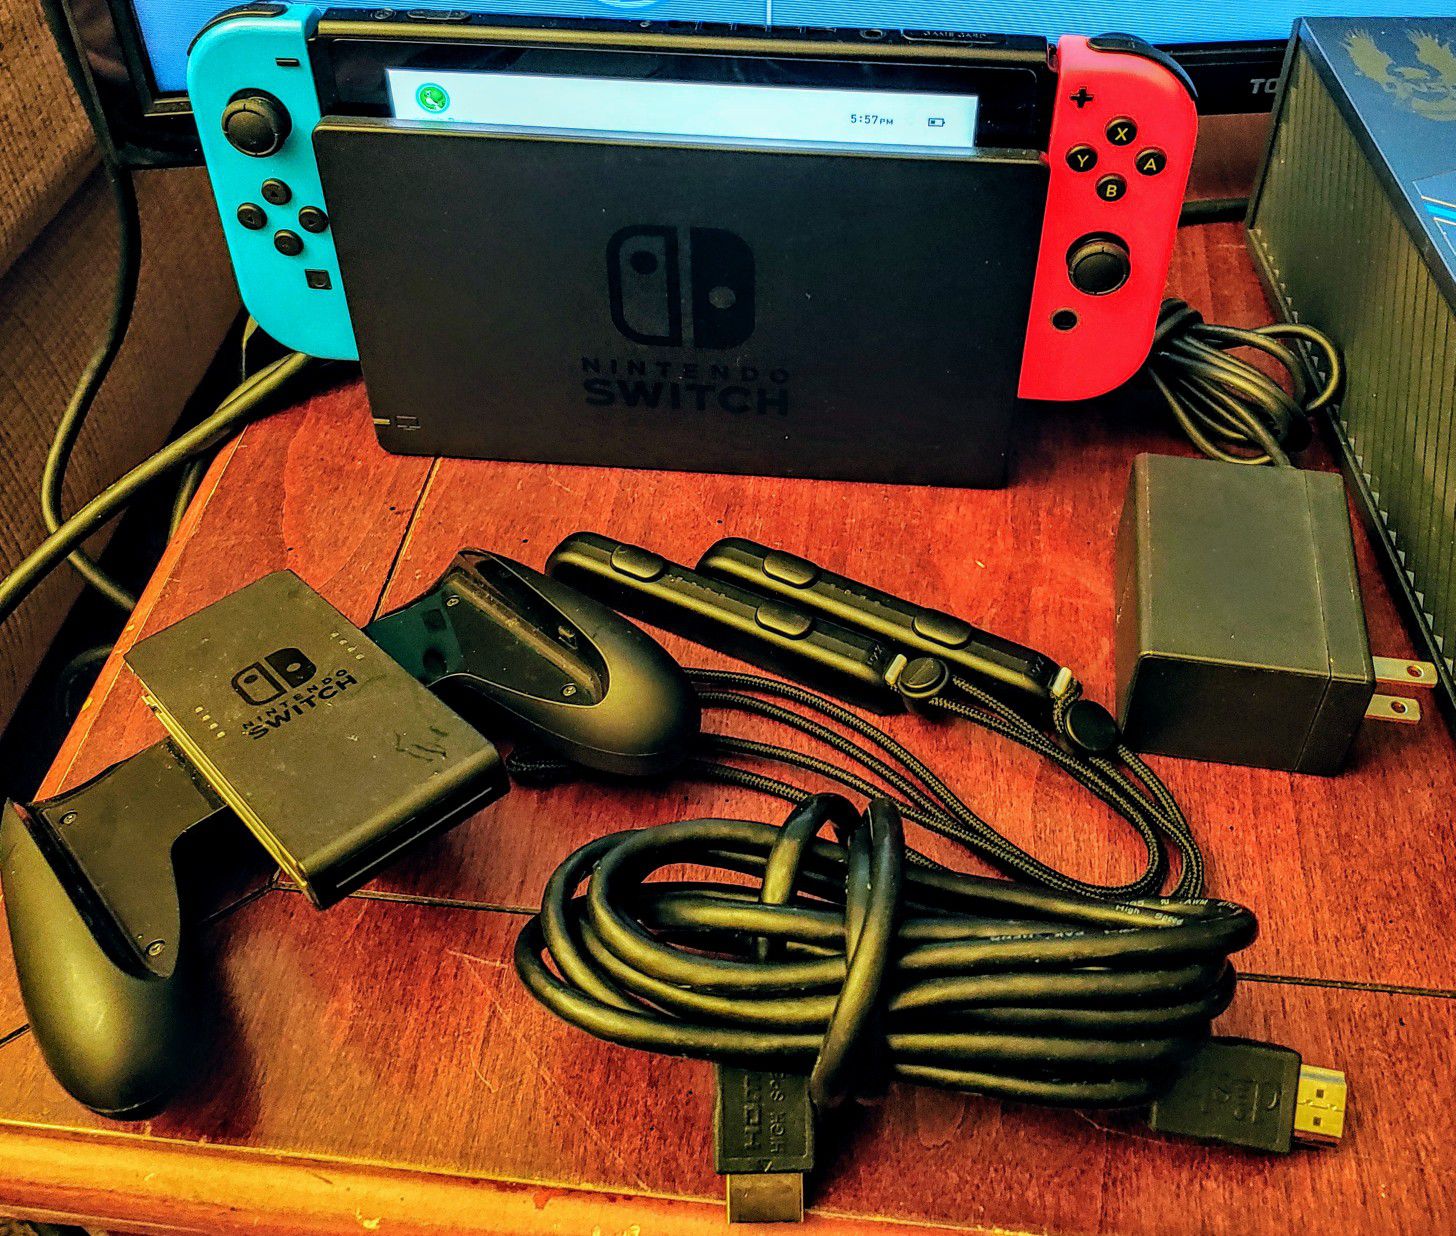 NINTENDO SWITCH NEON BLUE & RED FIRST WAVE MODEL#XAW100 COMPLETE SET UP EXCELLENT CONDITION 100%💥💥